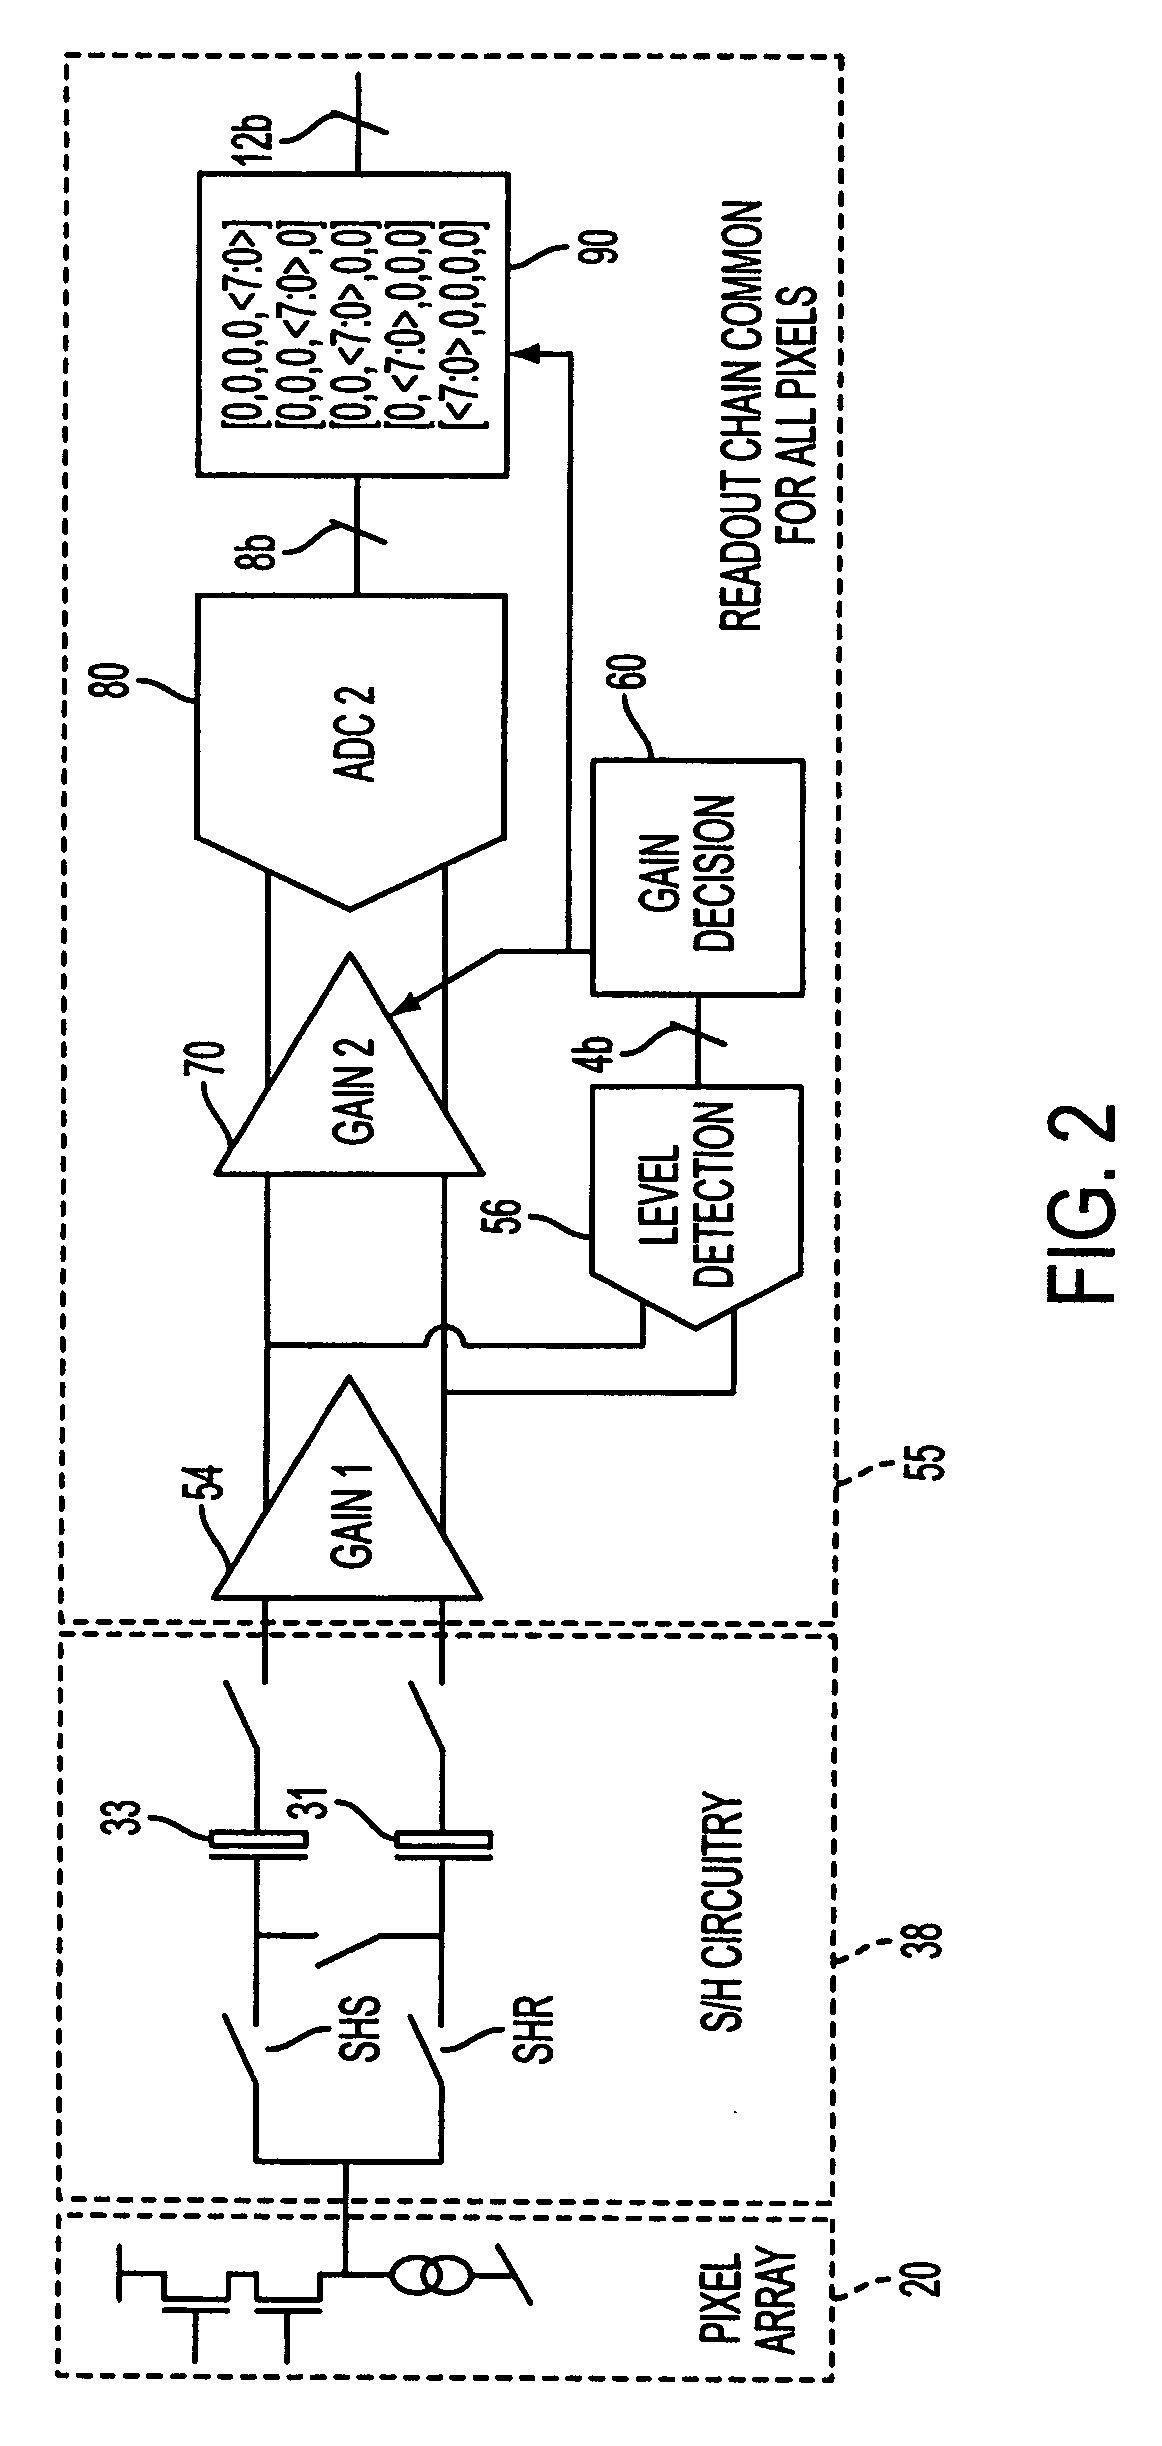 Readout technique for increasing or maintaining dynamic range in image sensors